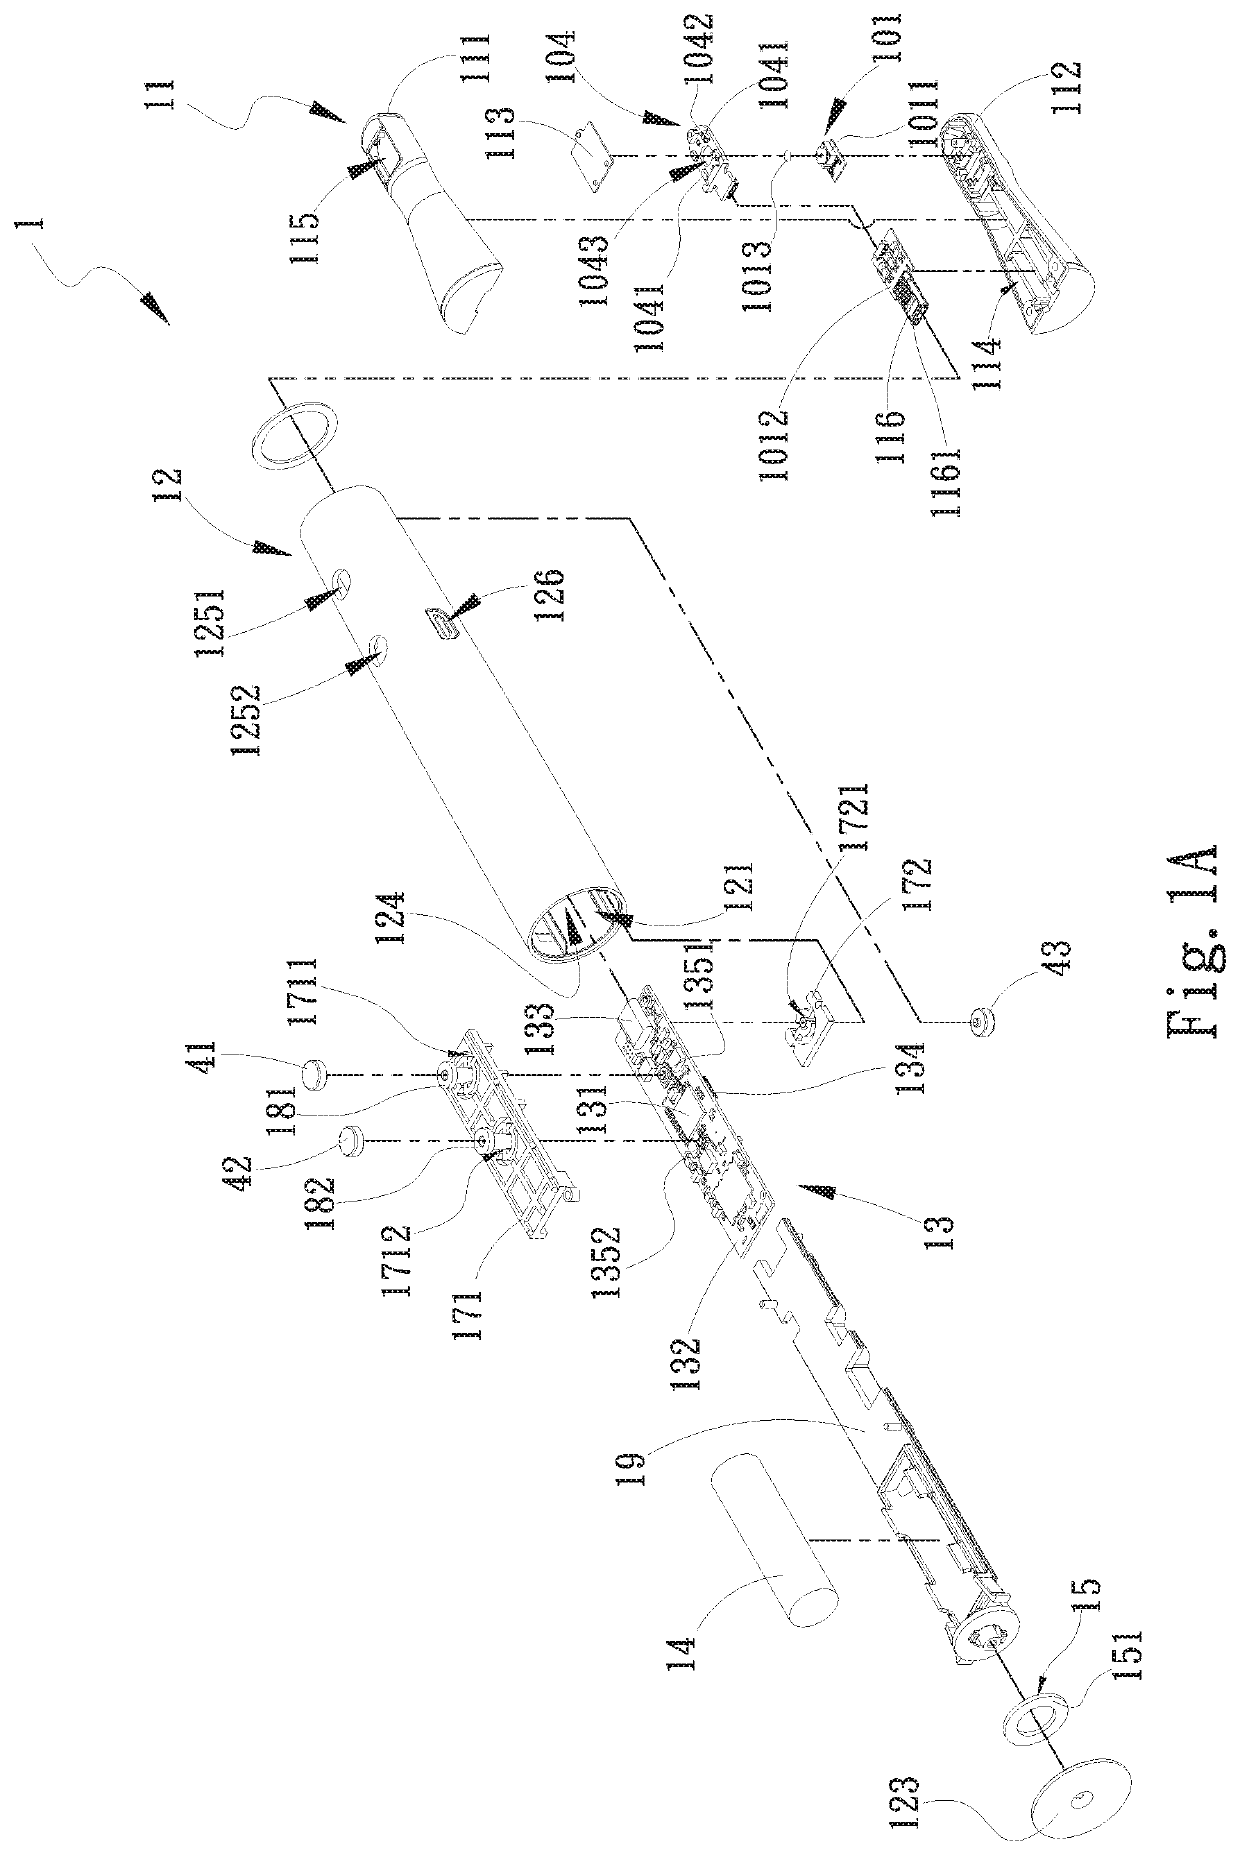 Oral screening device having a replaceable screening head